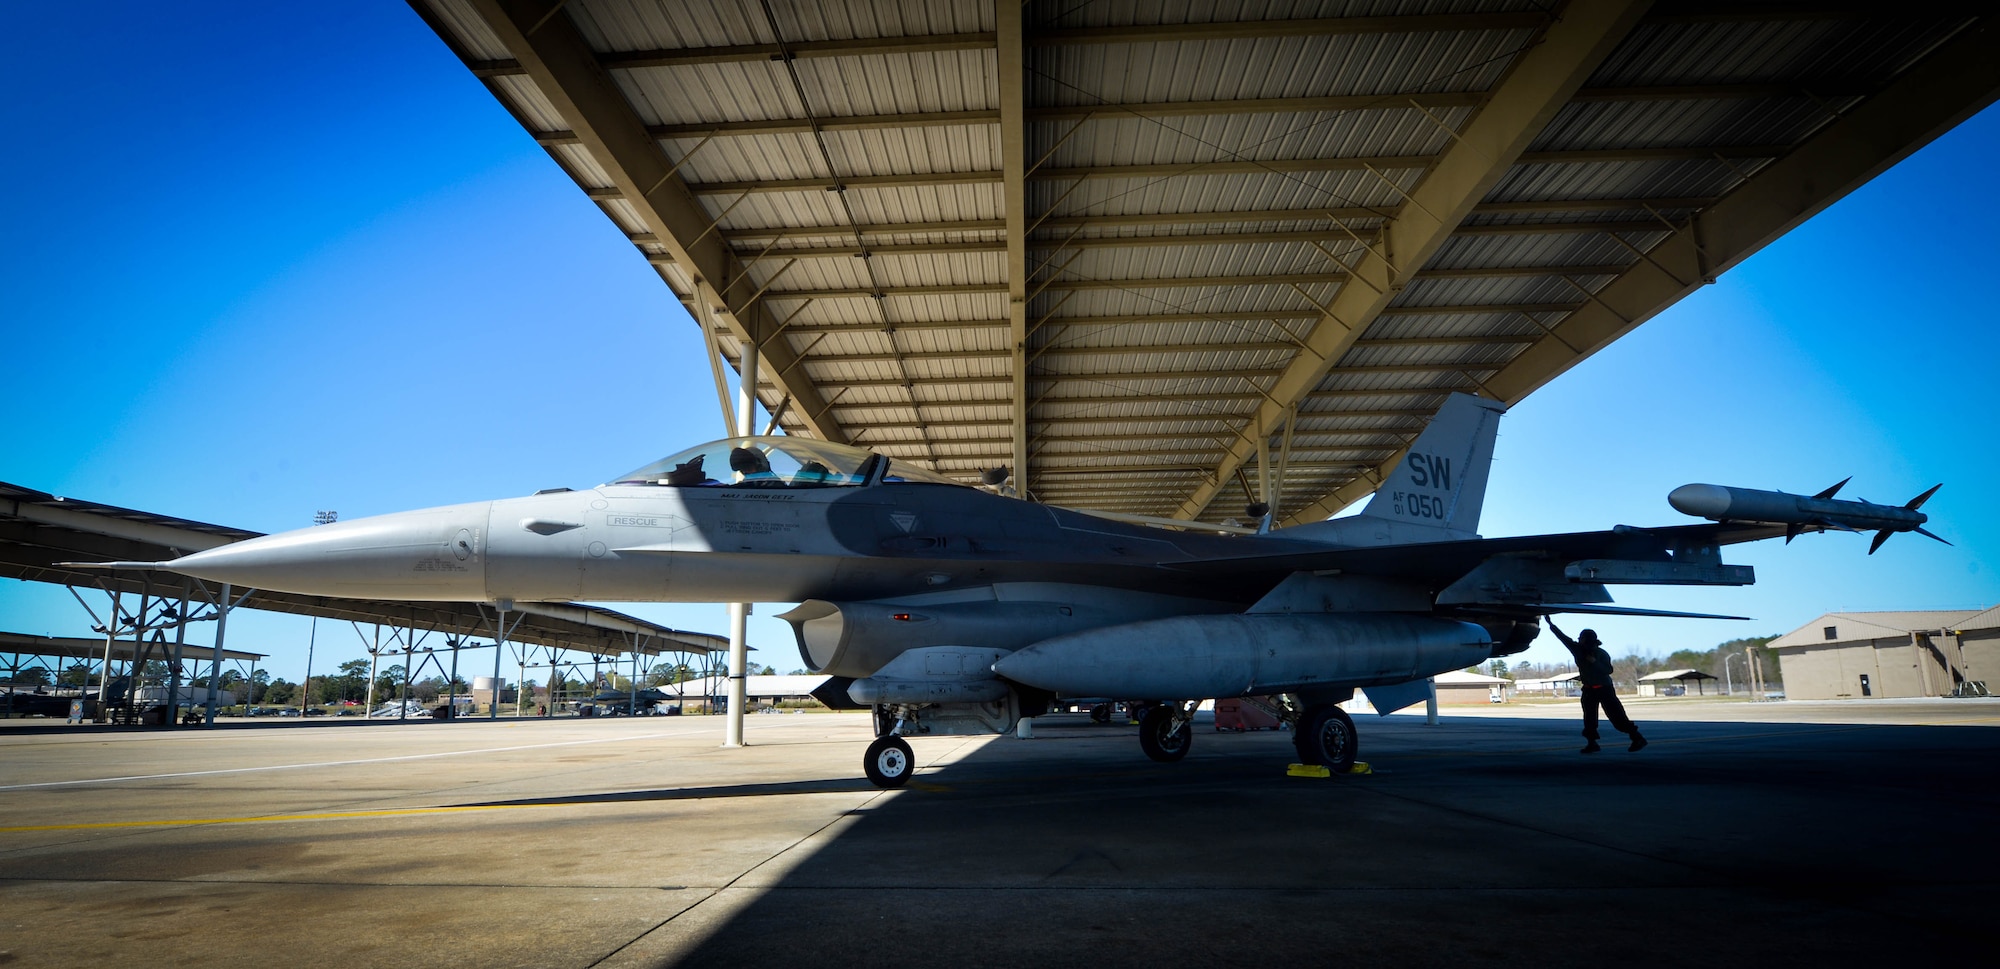 U.S. Air Force Airman 1st Class Victoria Suarez, 20th Aircraft Maintenance Squadron tactical aircraft maintainer, inspects an F-16CM Fighting Falcon on Shaw Air Force Base, S.C., Feb. 26, 2017. Tactical aircraft maintainers are responsible for the maintenance, upkeep, launch and recovery of the aircraft to ensure they are ready to takeoff at a moment’s notice. (U.S. Air Force photo by Senior Airman Michael Cossaboom)